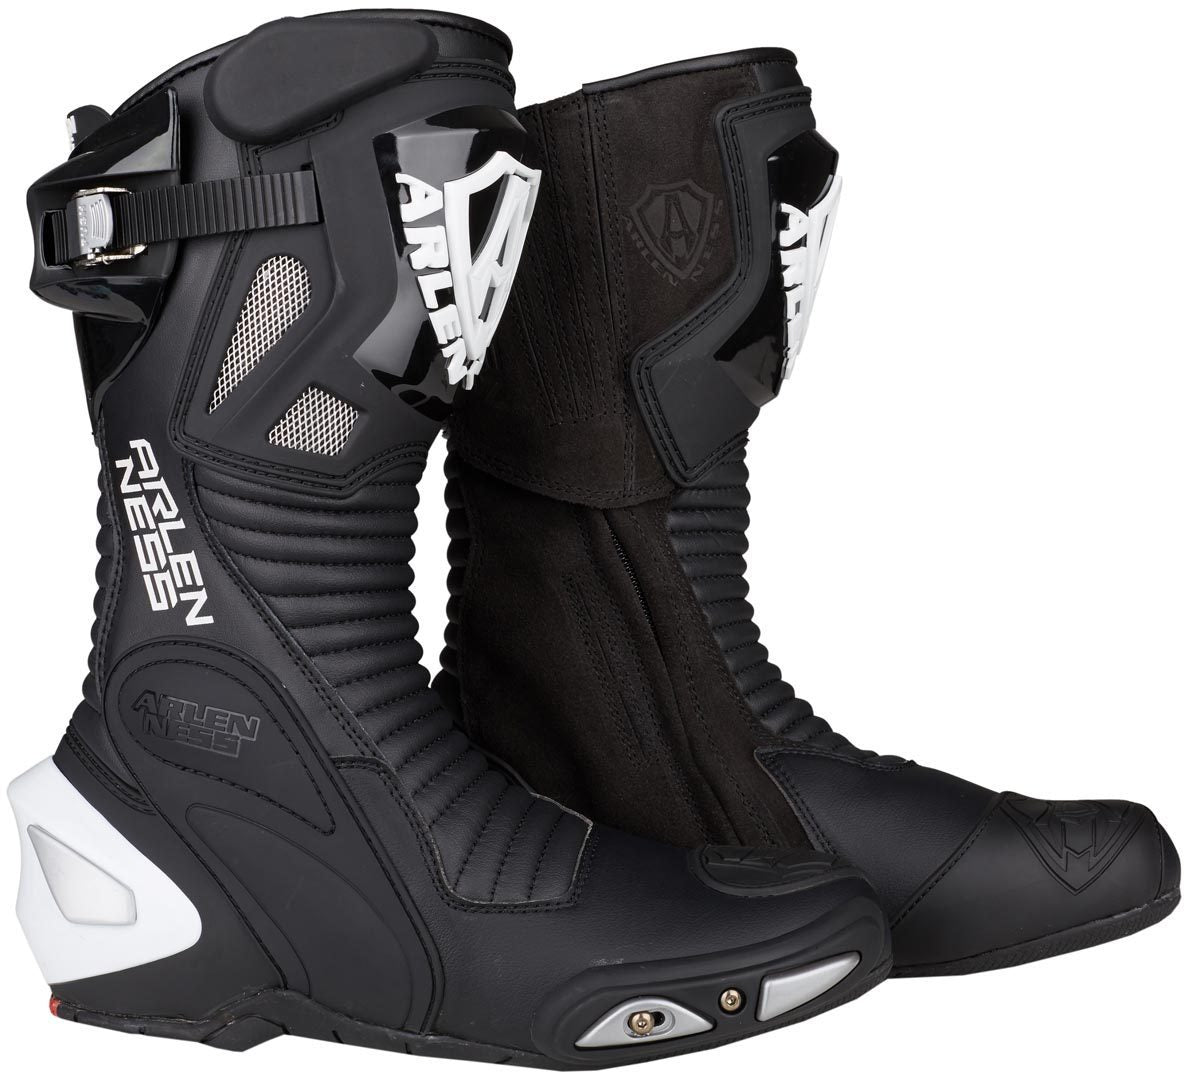 Buy Arlen Ness Pro Shift Boots Online with Free Shipping – superbikestore